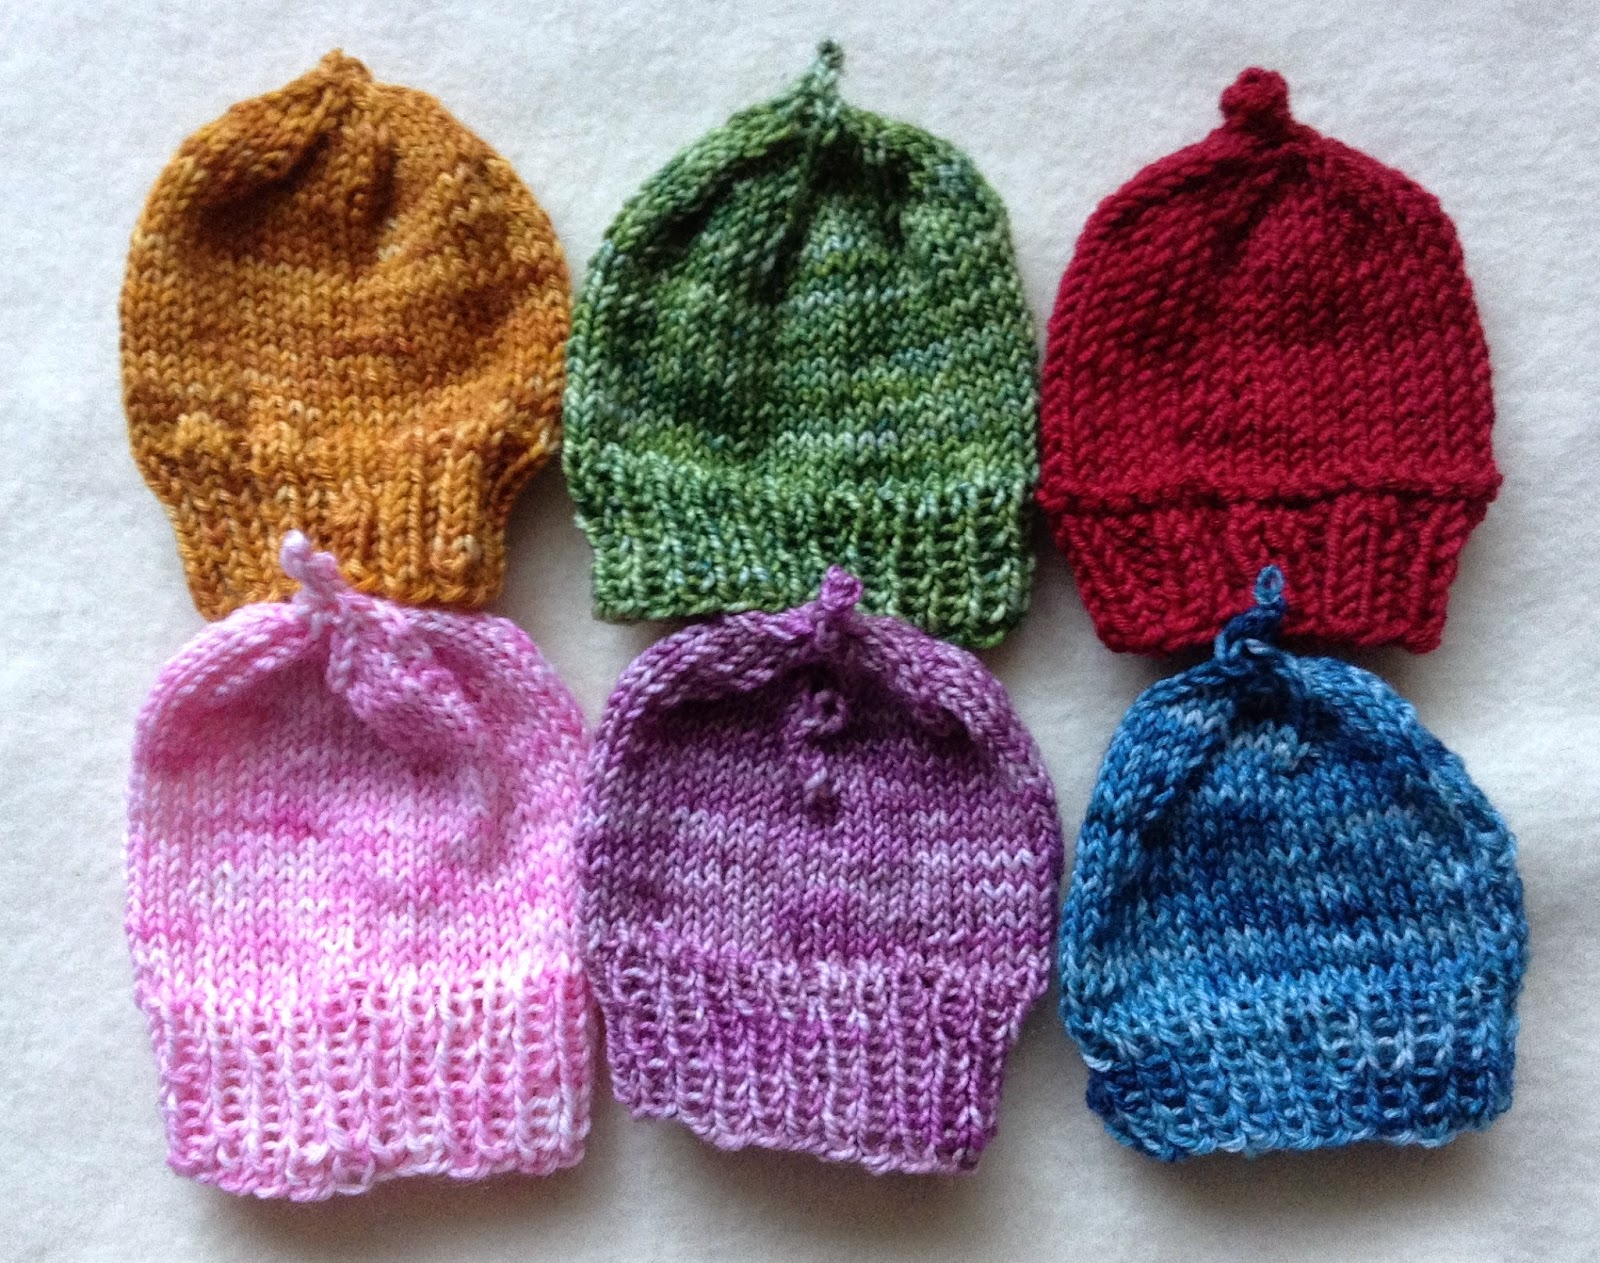 Knitting for Peace: Six Fingering Weight Yarn Preemie Hats